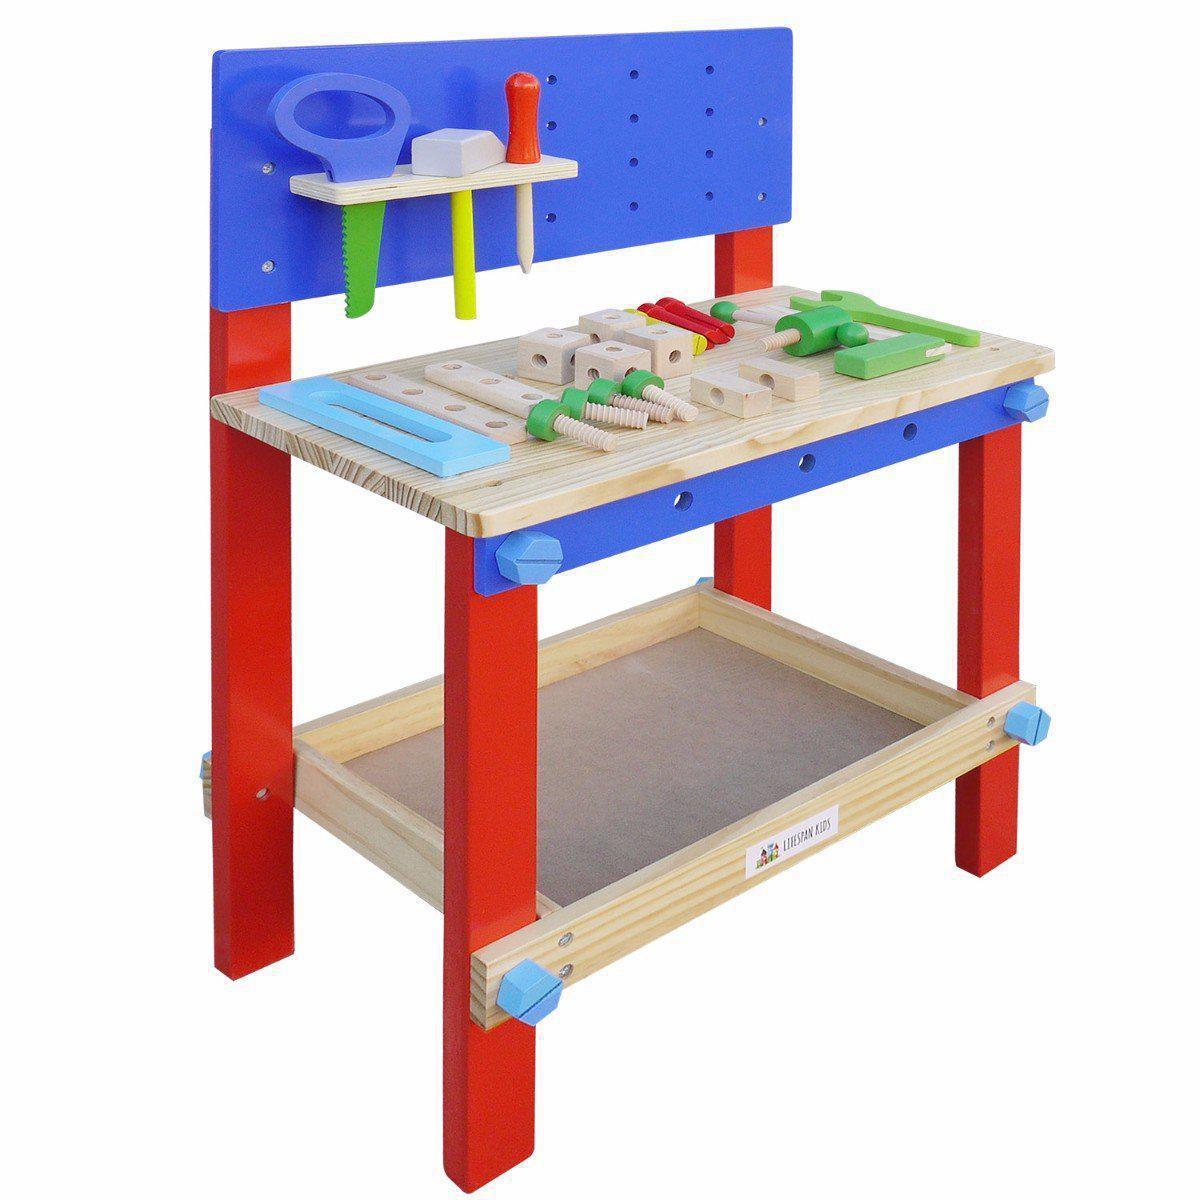 Buy Toy Work Bench and Kids Toy Tool Set Australia